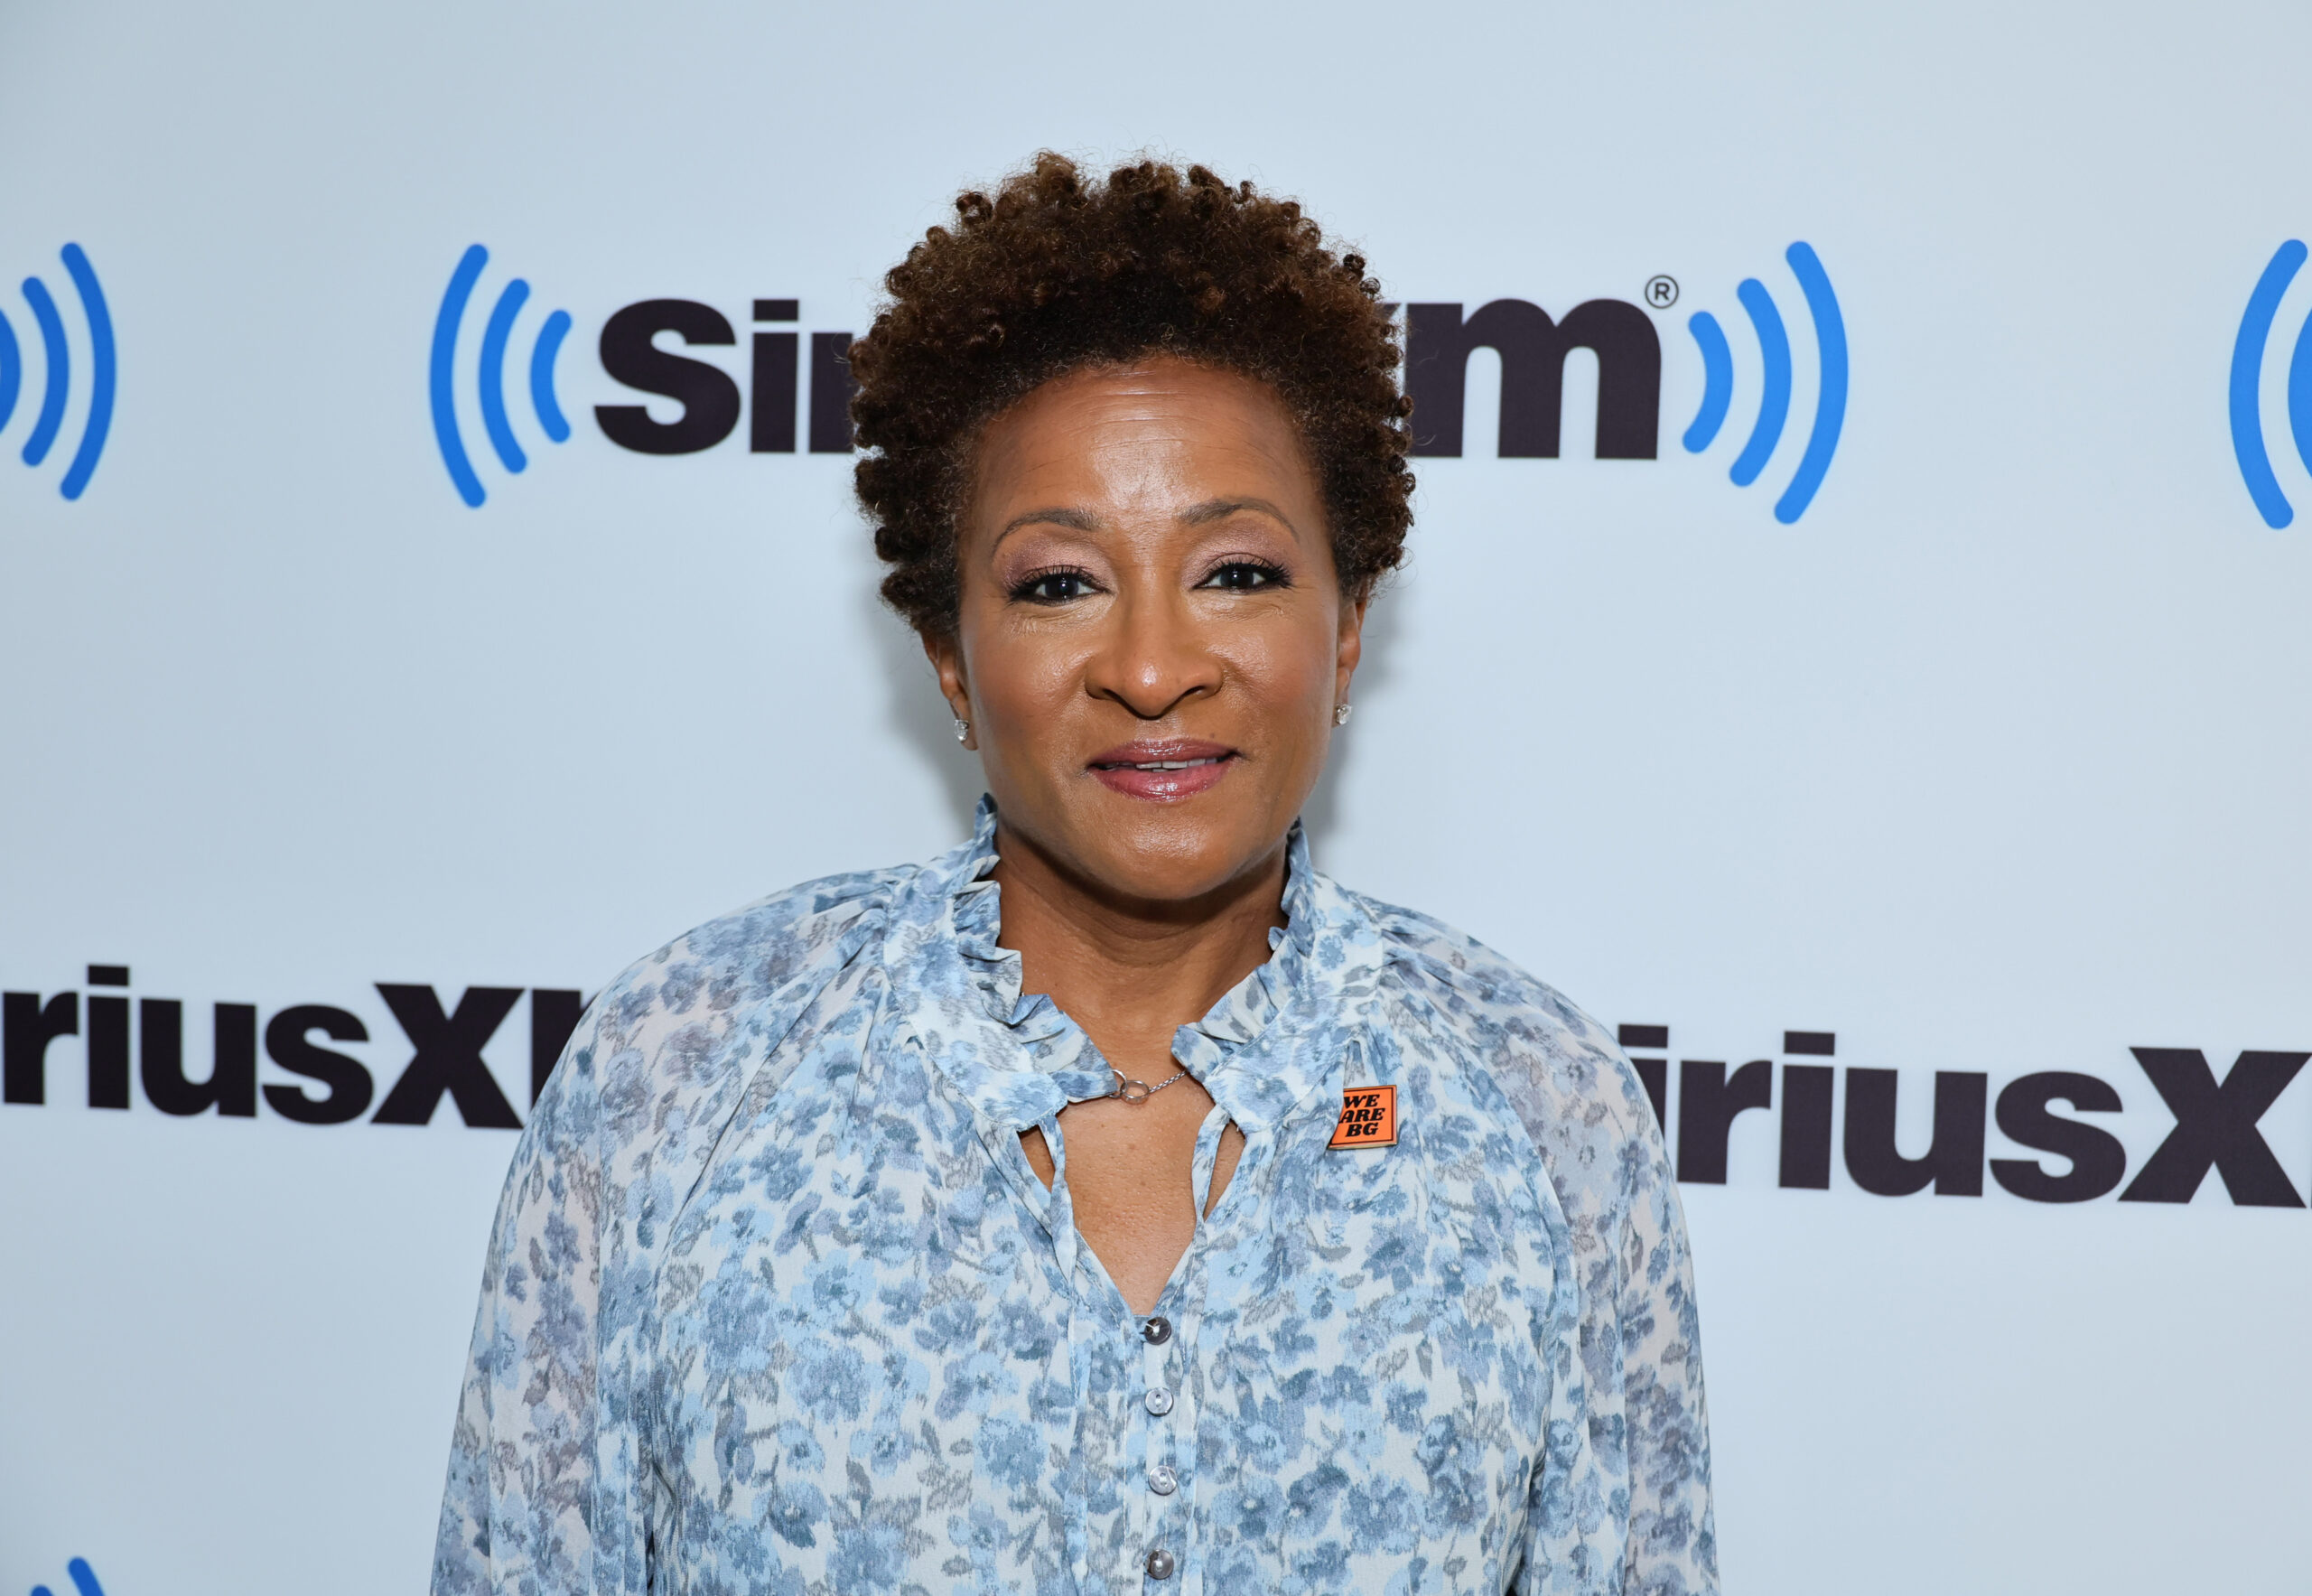 Wanda Sykes Refused to Co-Host The View Because of Ex-Trump Advisor Alyssa Farah Griffin: Report